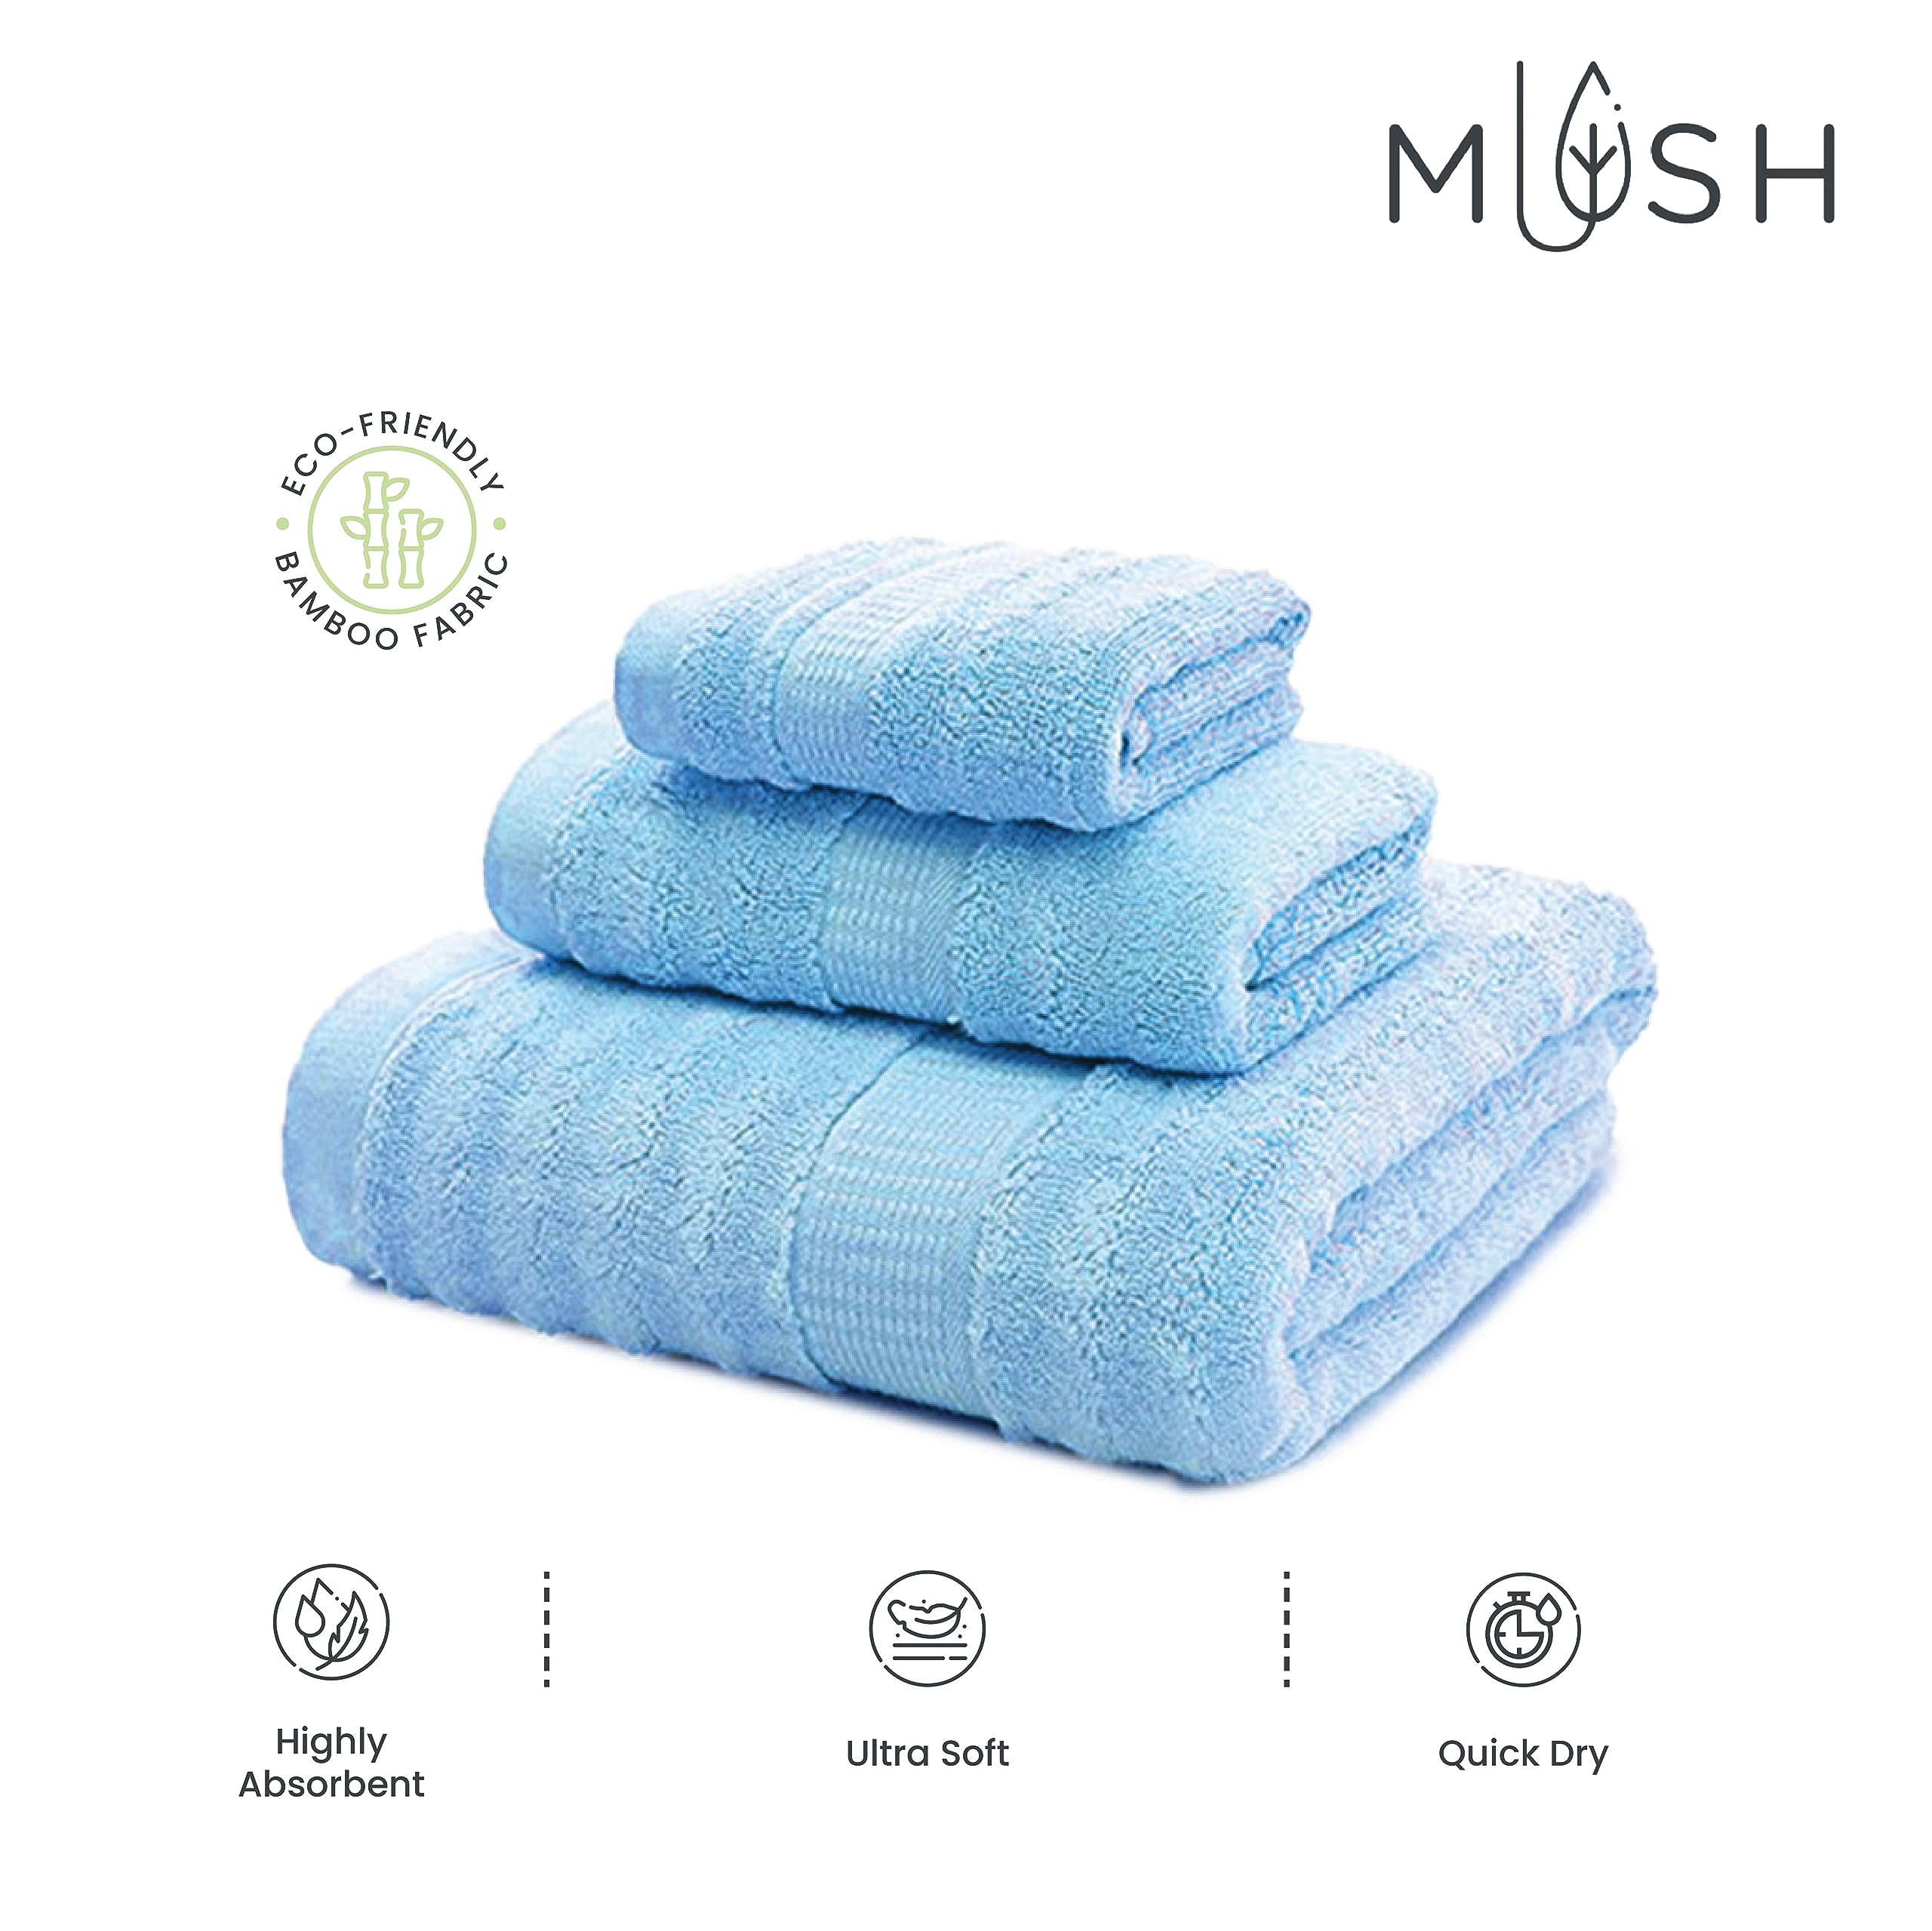 Mush 3 Piece Luxurious Bamboo Towels Set for Men and Women with Premium Packaging | Set of Bath, Hand, and Face Towel | Perfect as a Diwali/Wedding/House Warming (Gift Box : Sky Blue)